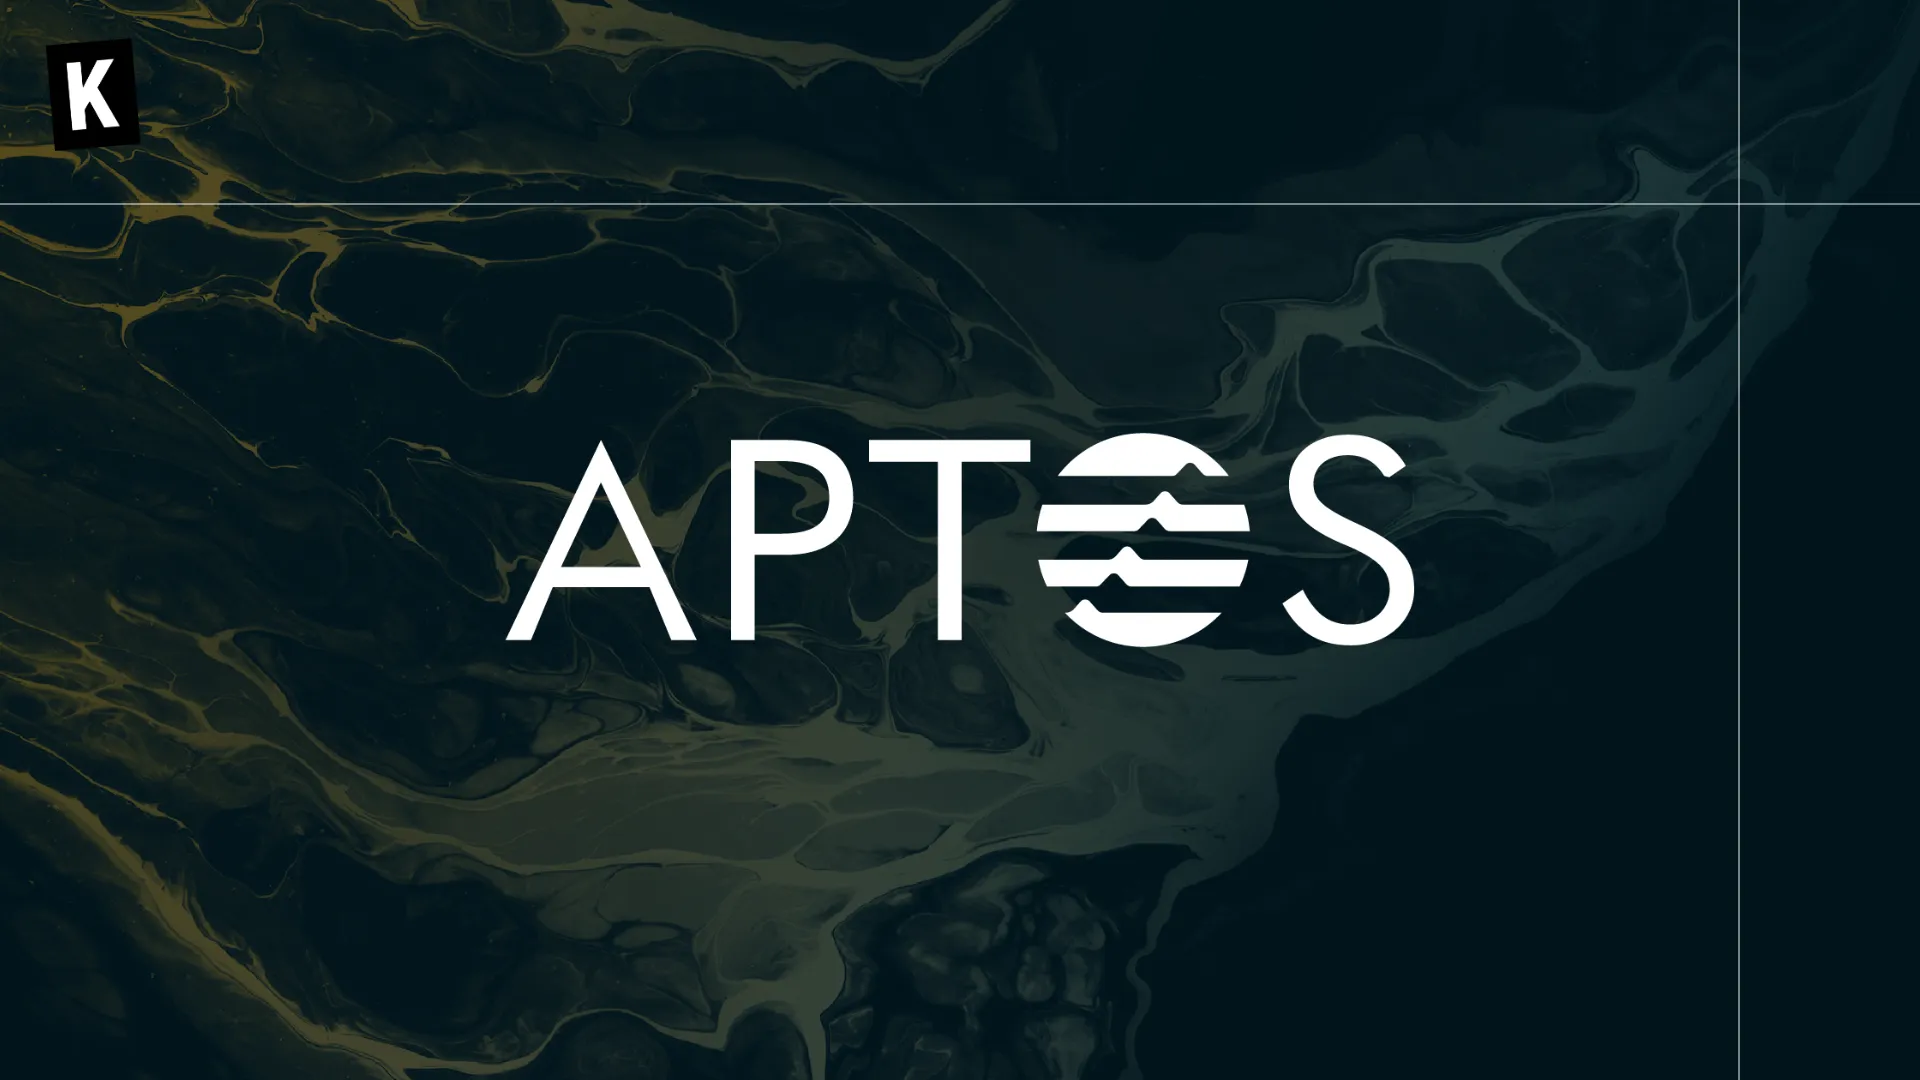 Aptos Blockchain Network Recovers After a Five-Hour Outage, Transactions Back to Normal